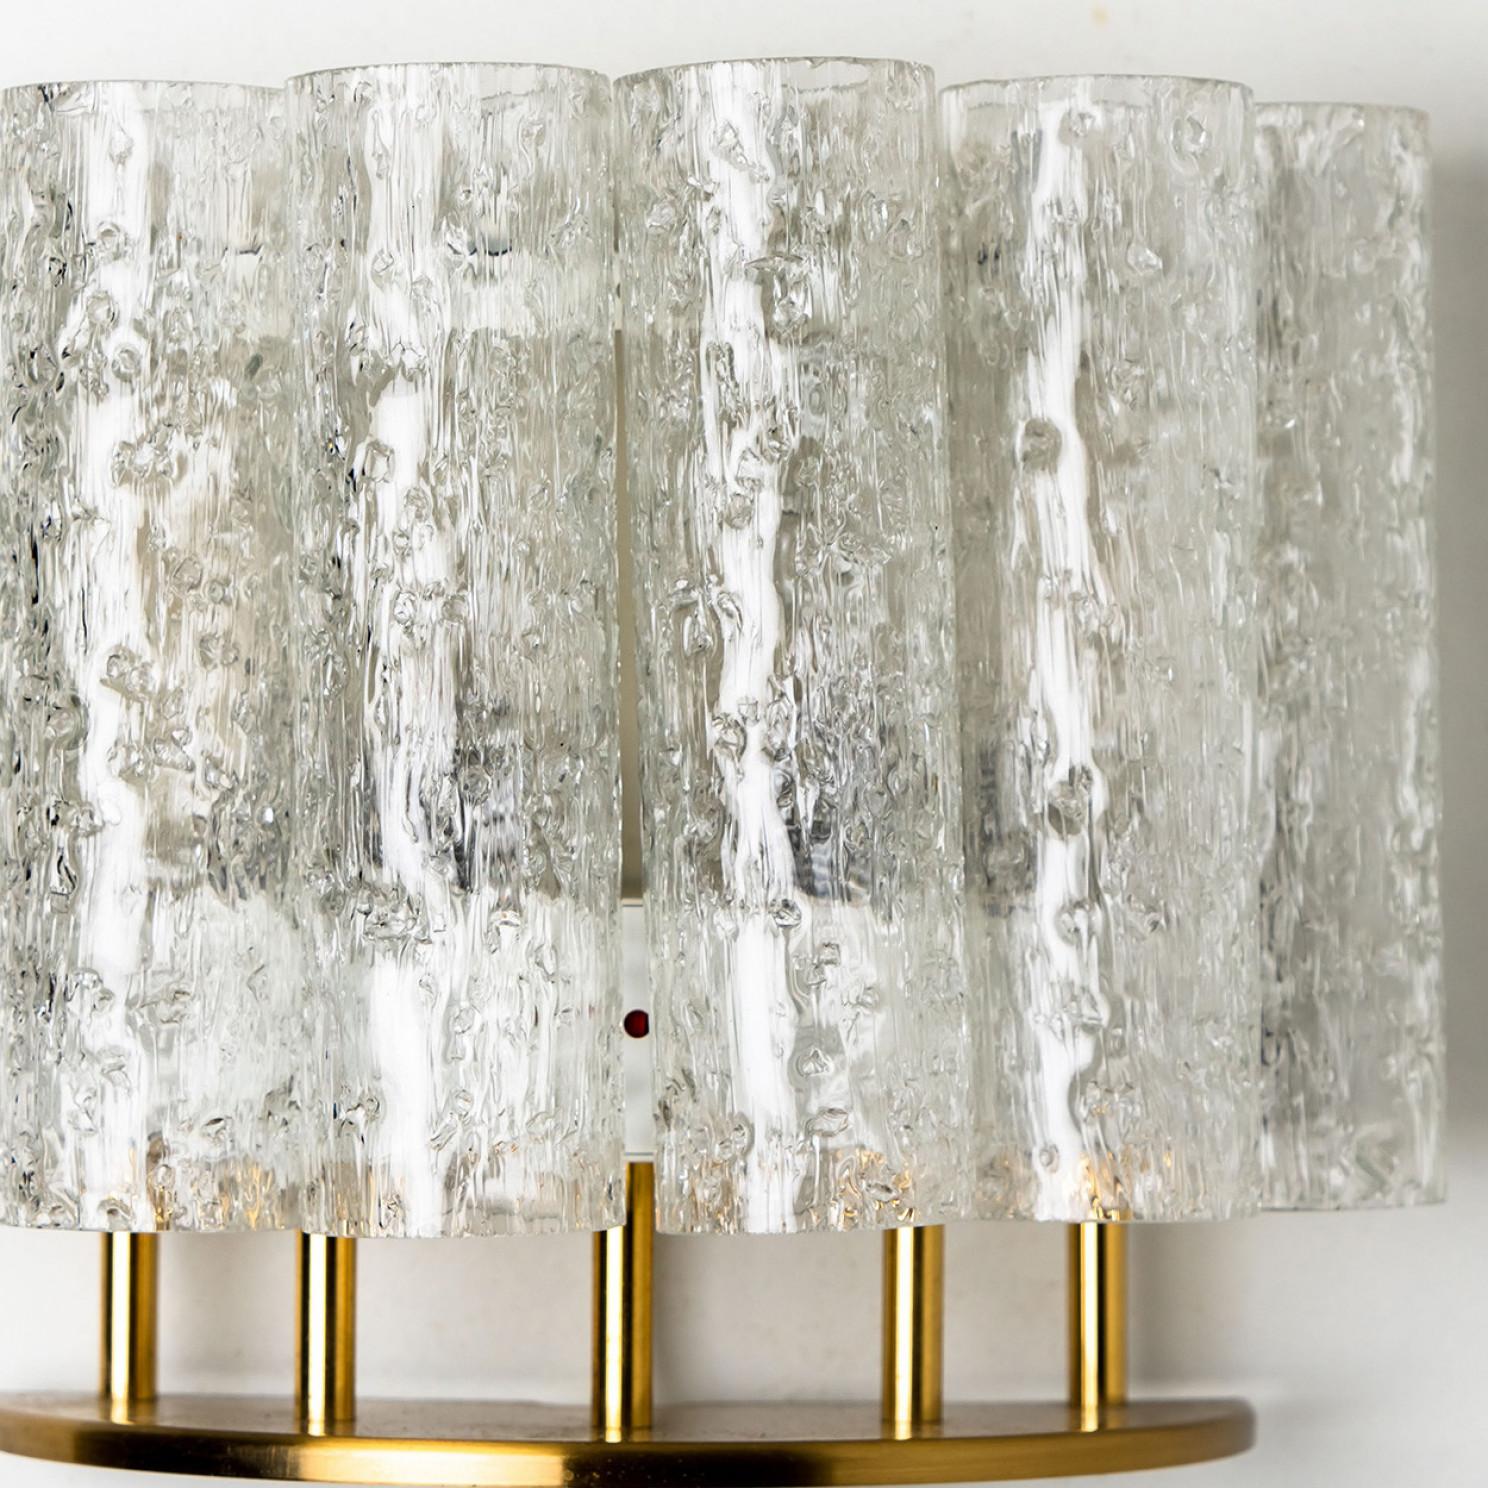 Doria Wall Brass and Glass Wall Lights, 1960s For Sale 2